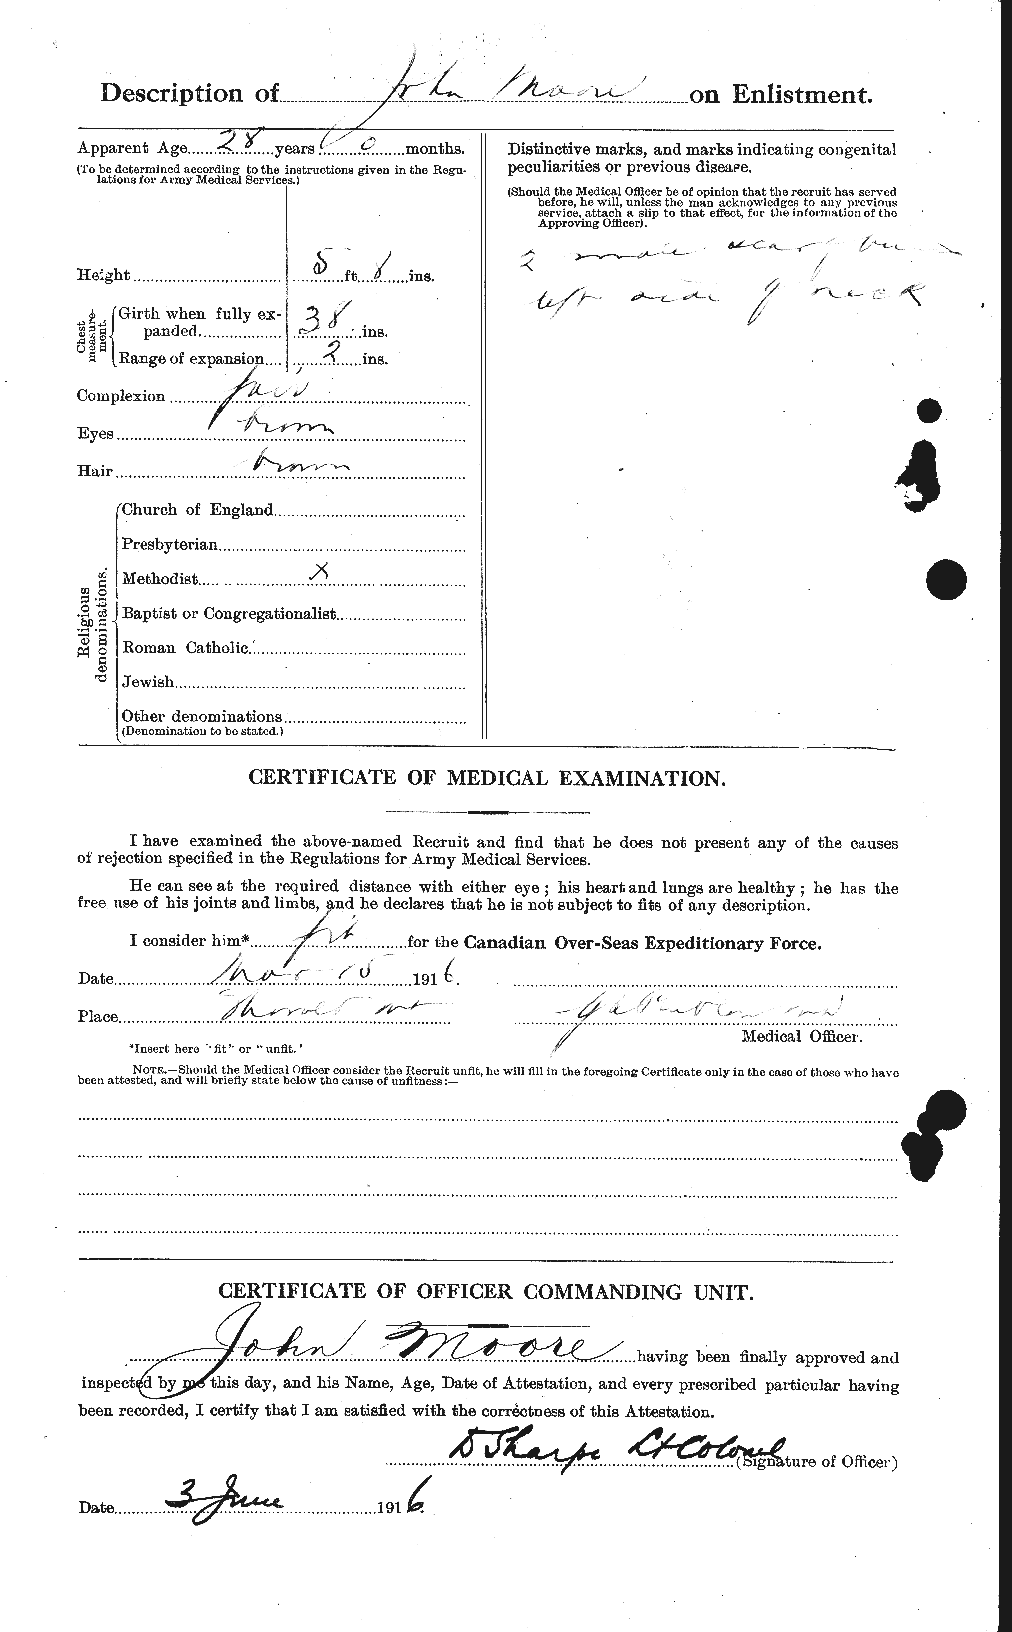 Personnel Records of the First World War - CEF 503228b